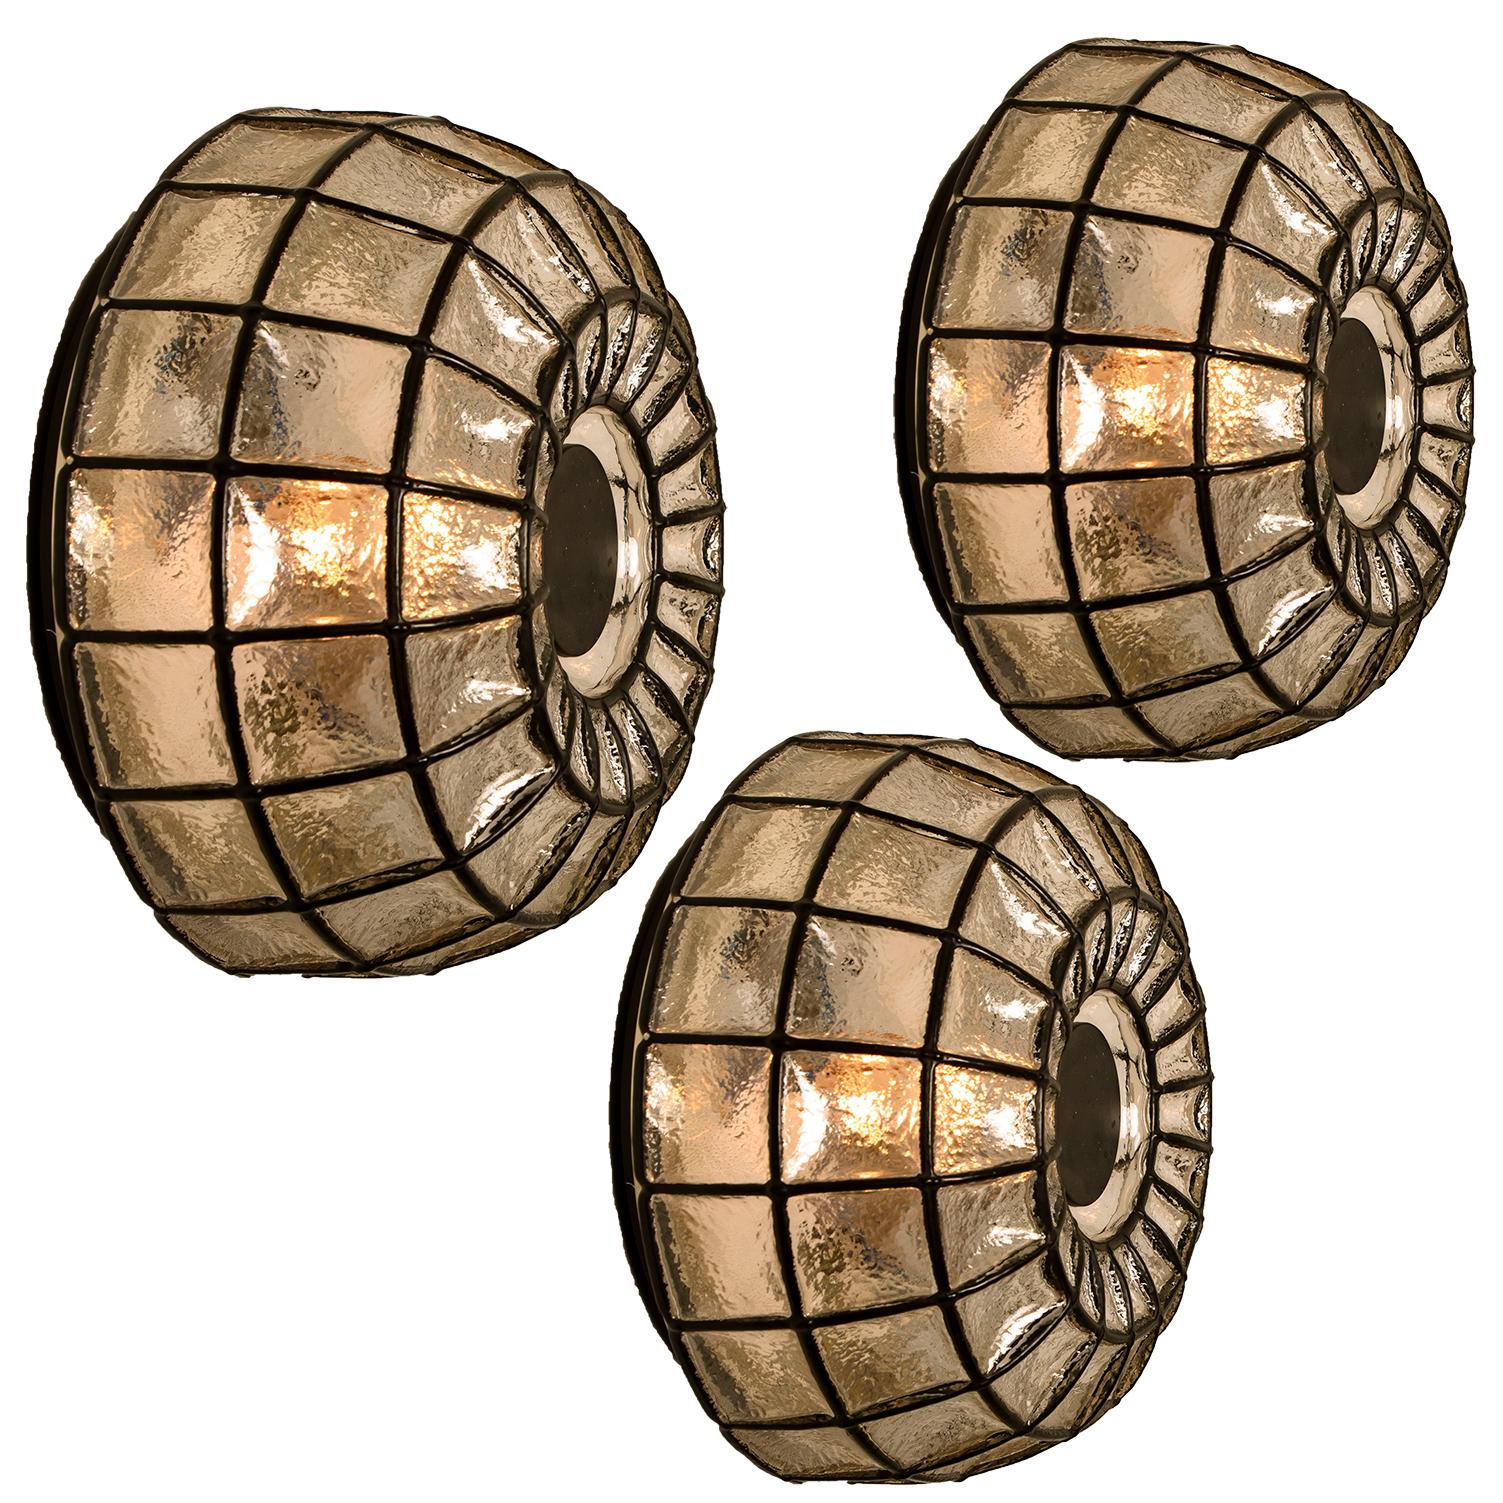 This beautiful and unique octagonal glass light flush mounts or wall lights/ sconces were manufactured by Glashütte Limburg in Germany during the 1960s (late 1960s or early 1970s). Nice craftsmanship. This Glass is blown and finished by hand. Each